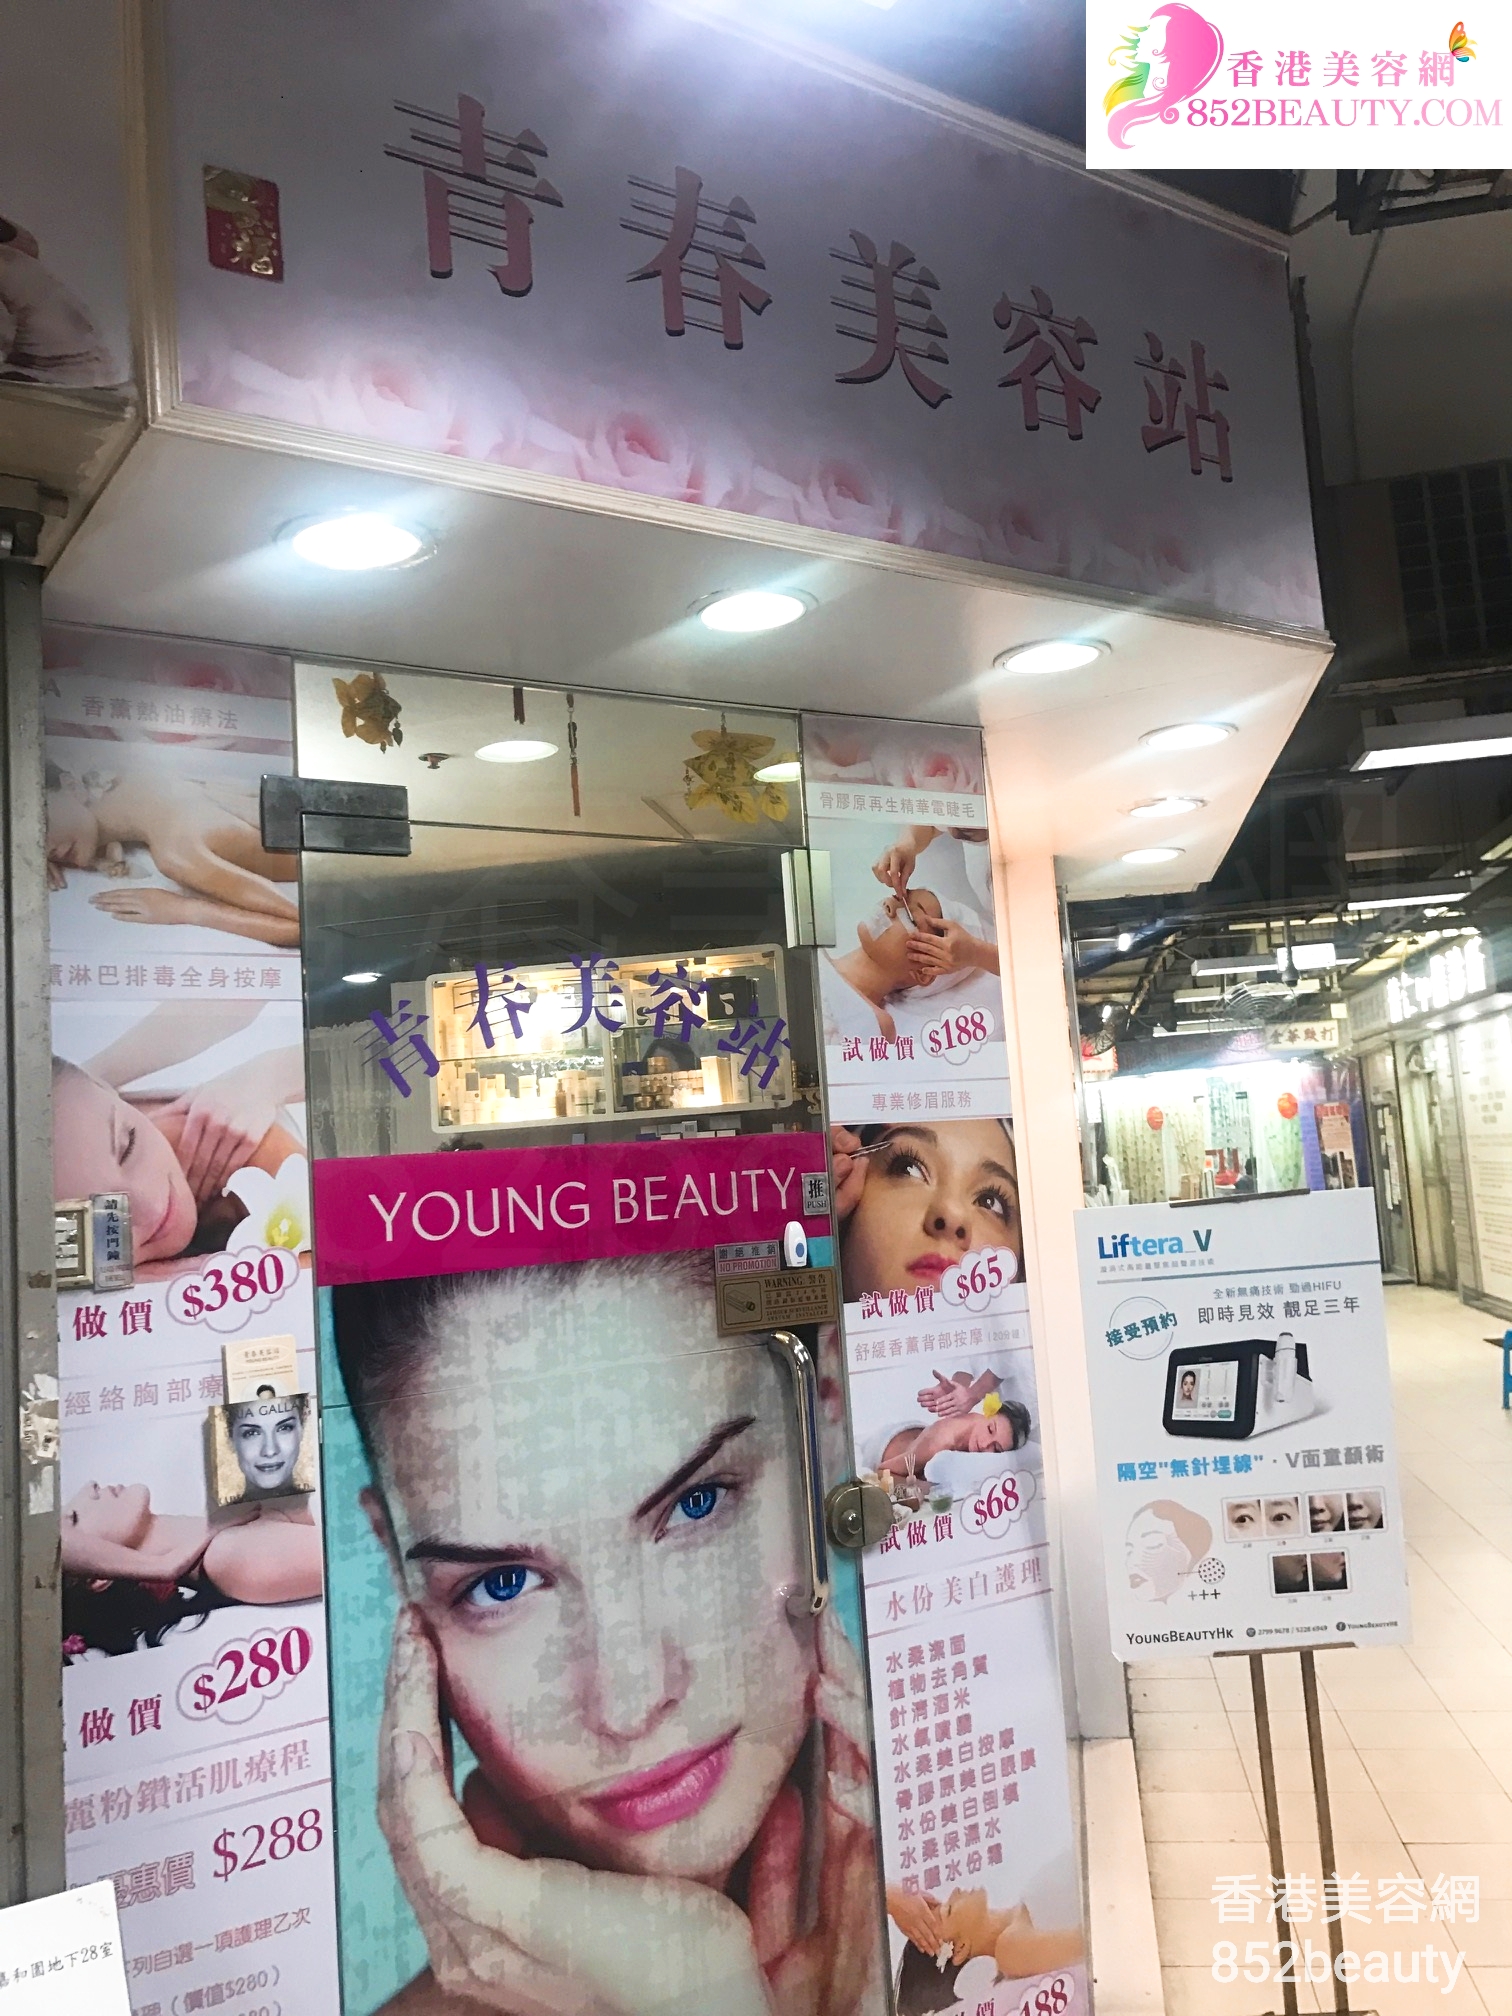 Slimming: 青春美容站 Young Beauty